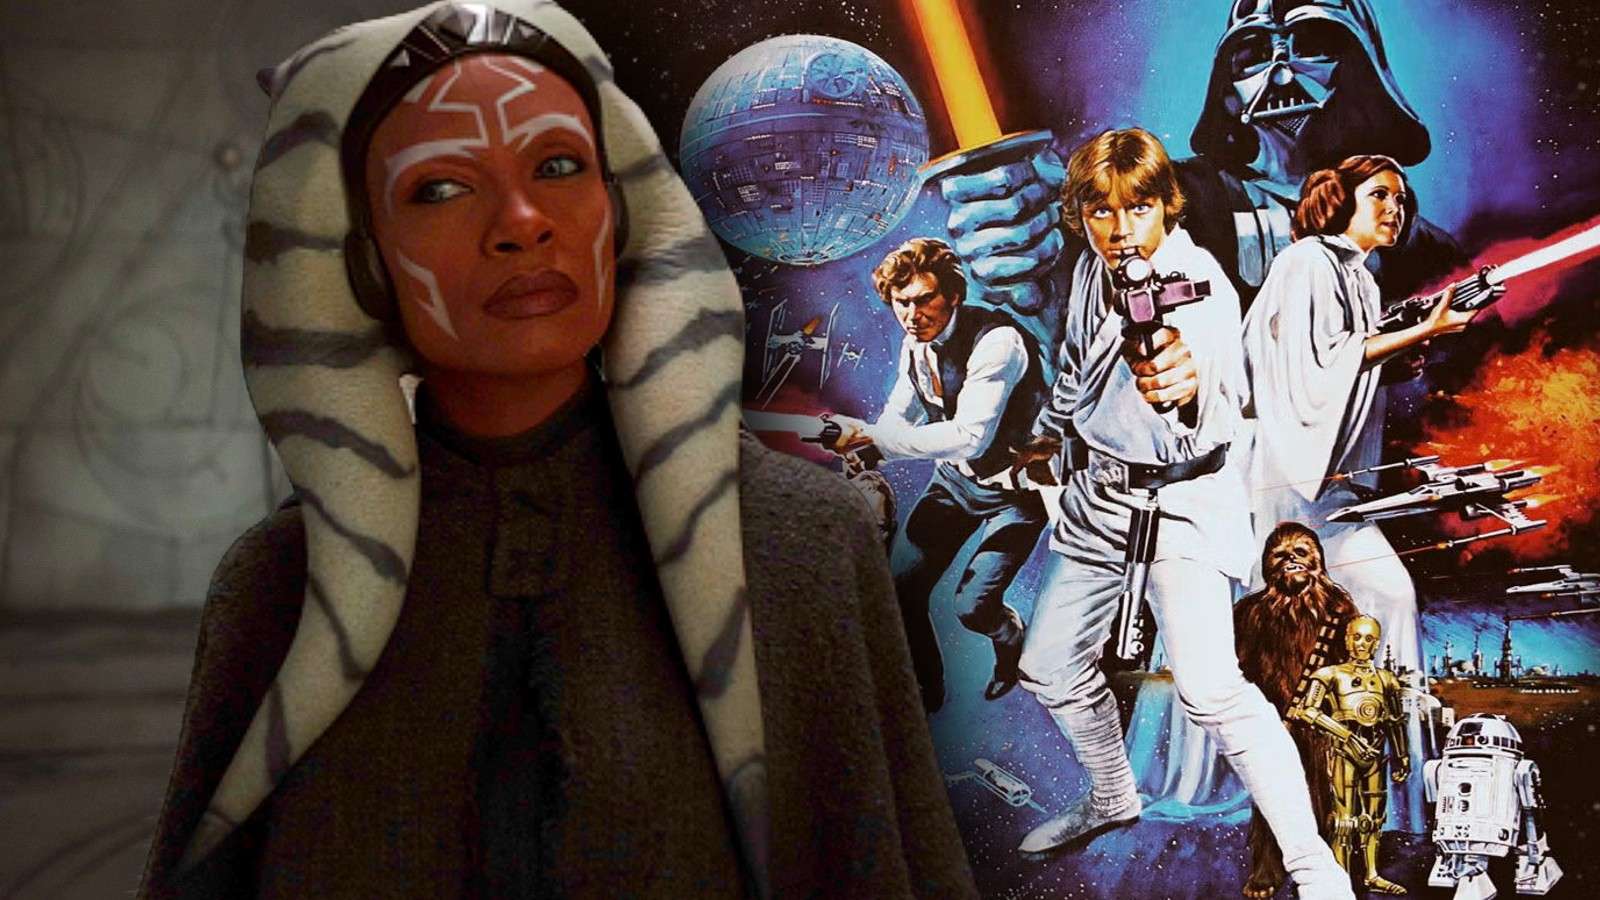 Rosario Dawson as Ahsoka and the poster for Star Wars